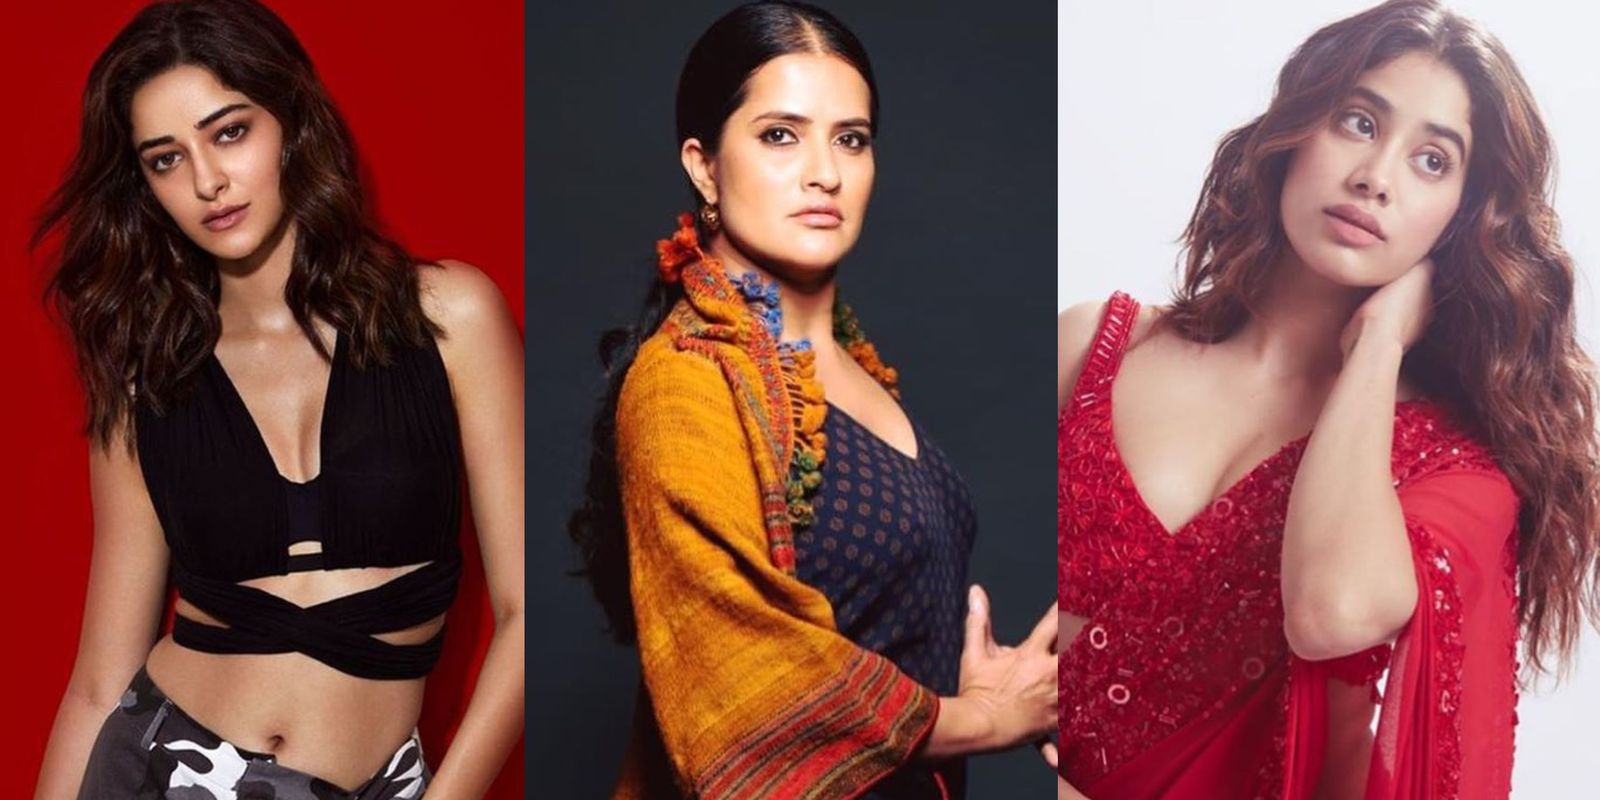 Sona Mohapatra Feels Financials Of Bollywood Don't Add Up: ‘Your Ananya Pandays And Your Janhvi Kapoors Haven’t Even Proven Their Worth’